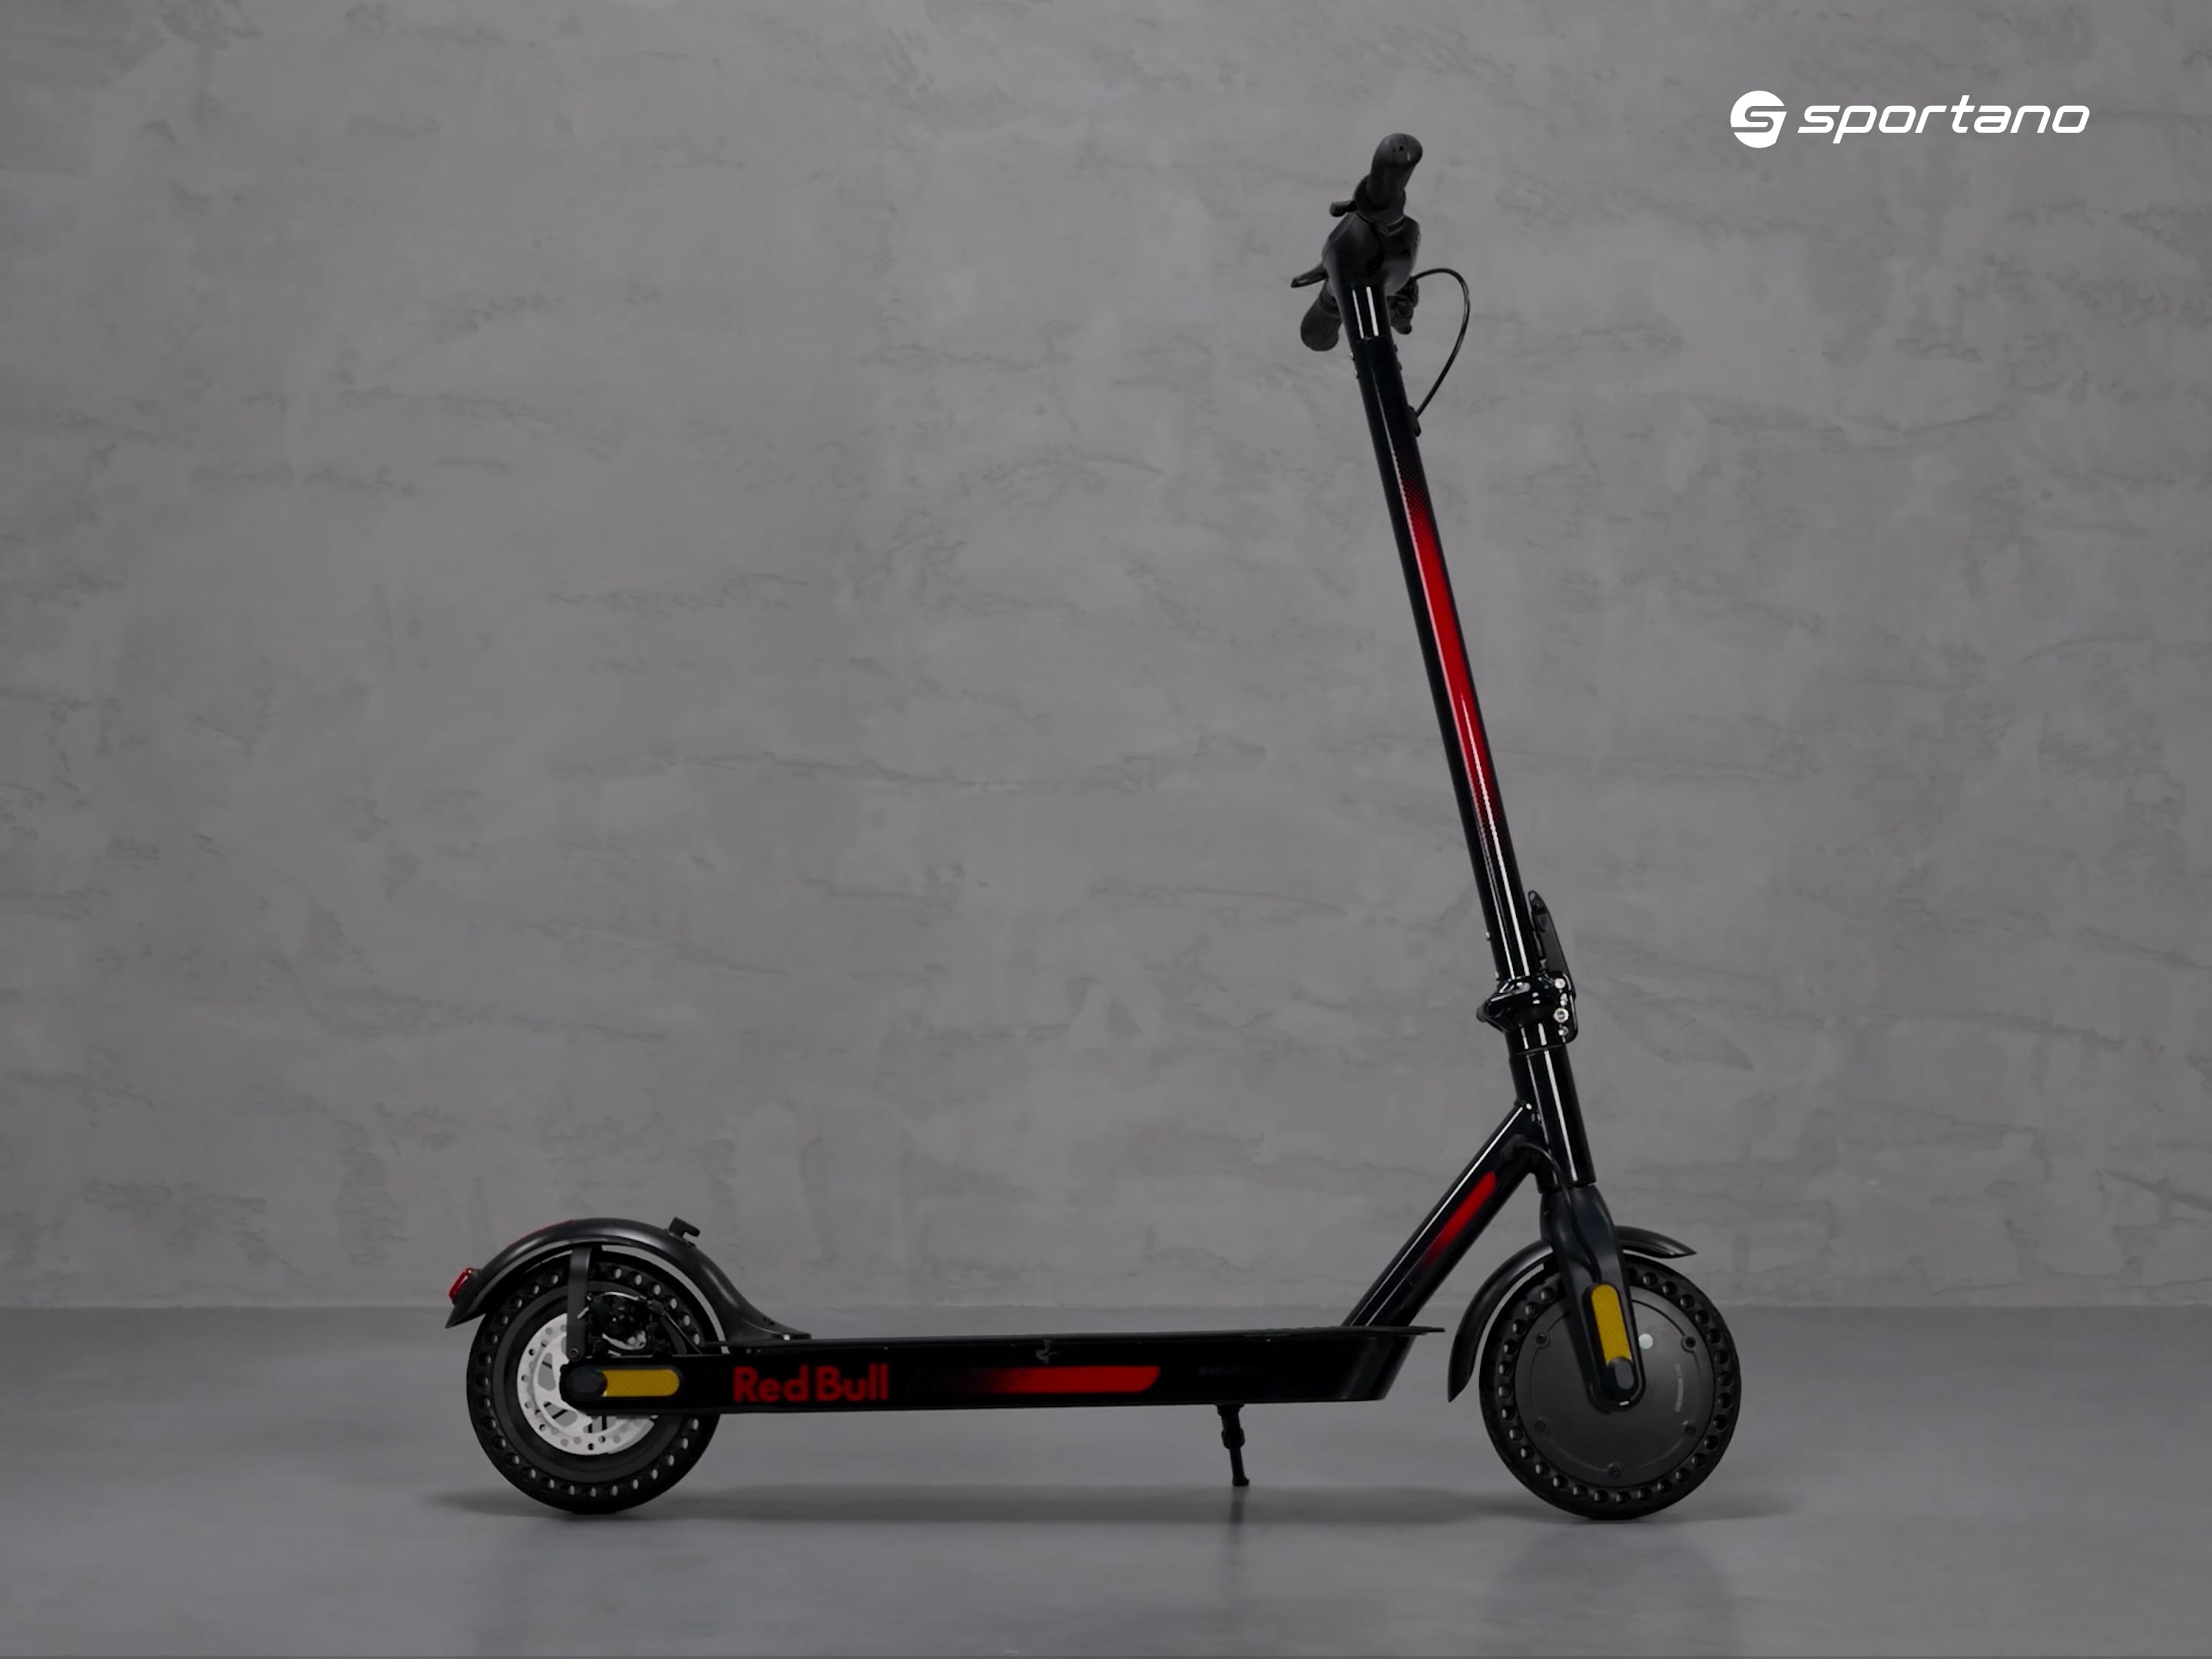 Red Bull RTEEN85-75 8.5" navy blue electric scooter